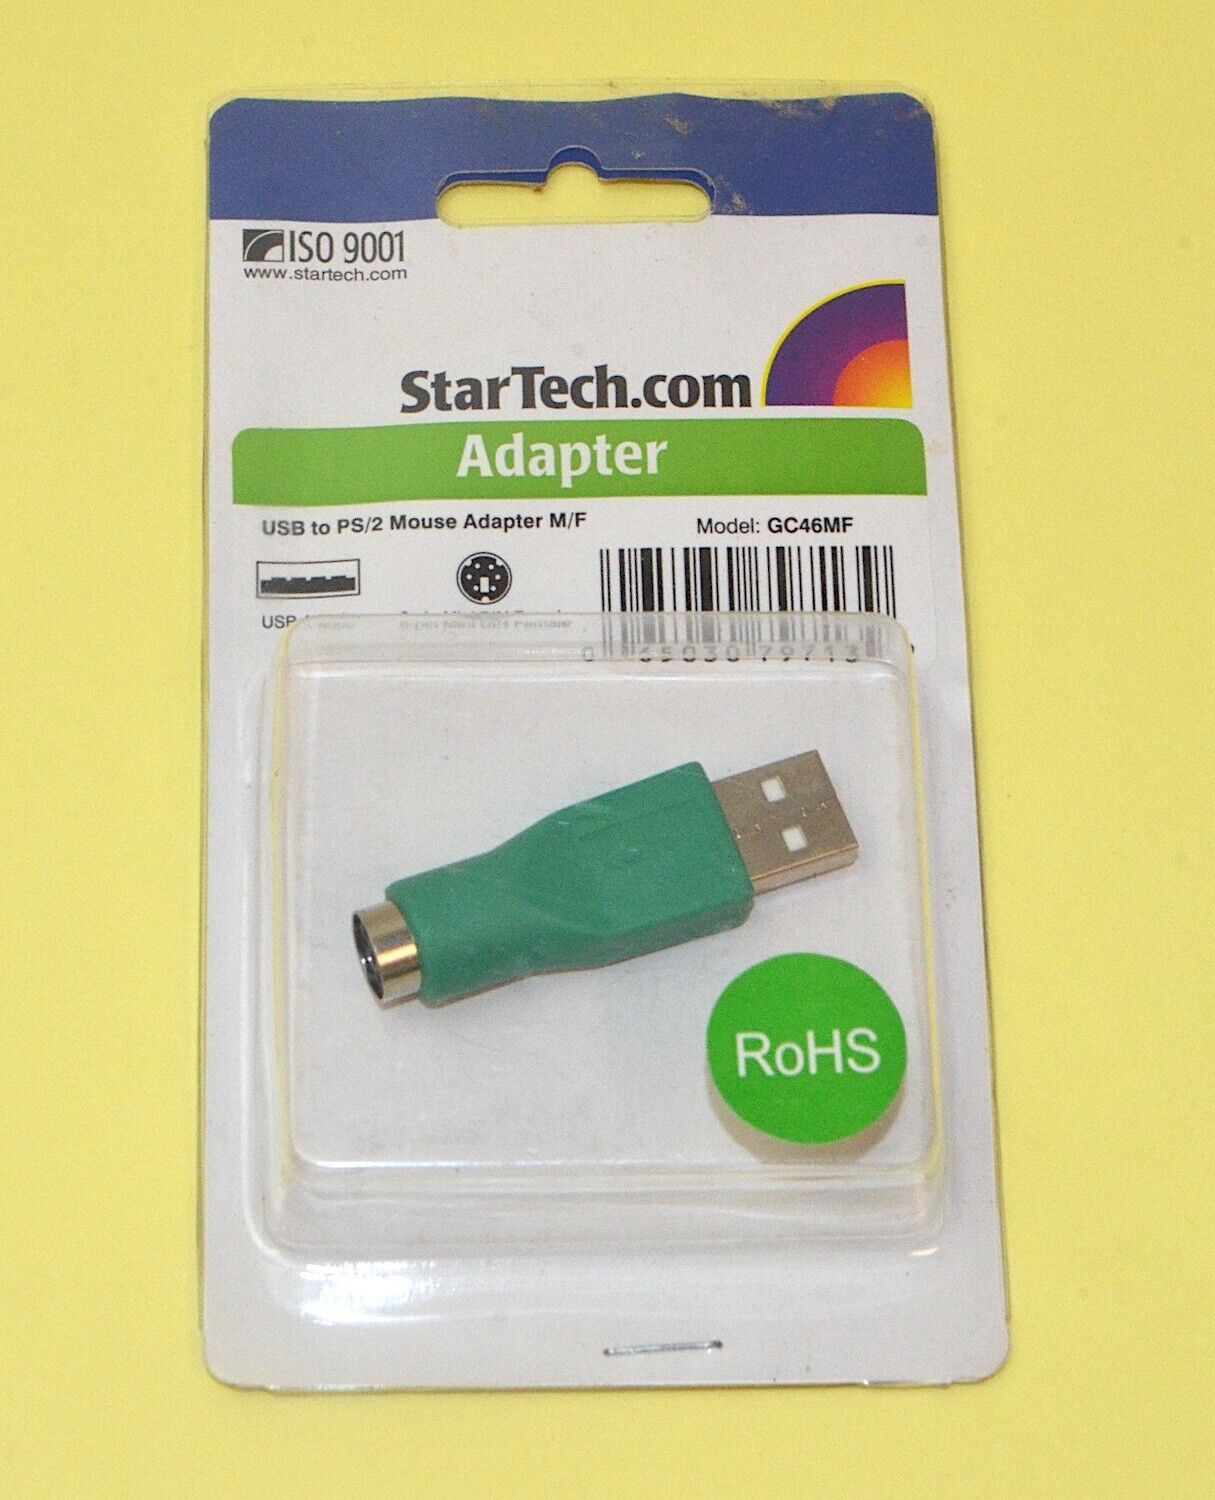 StarTech USB to PS/2 Mouse Adapter, M/F *New* GC46MF